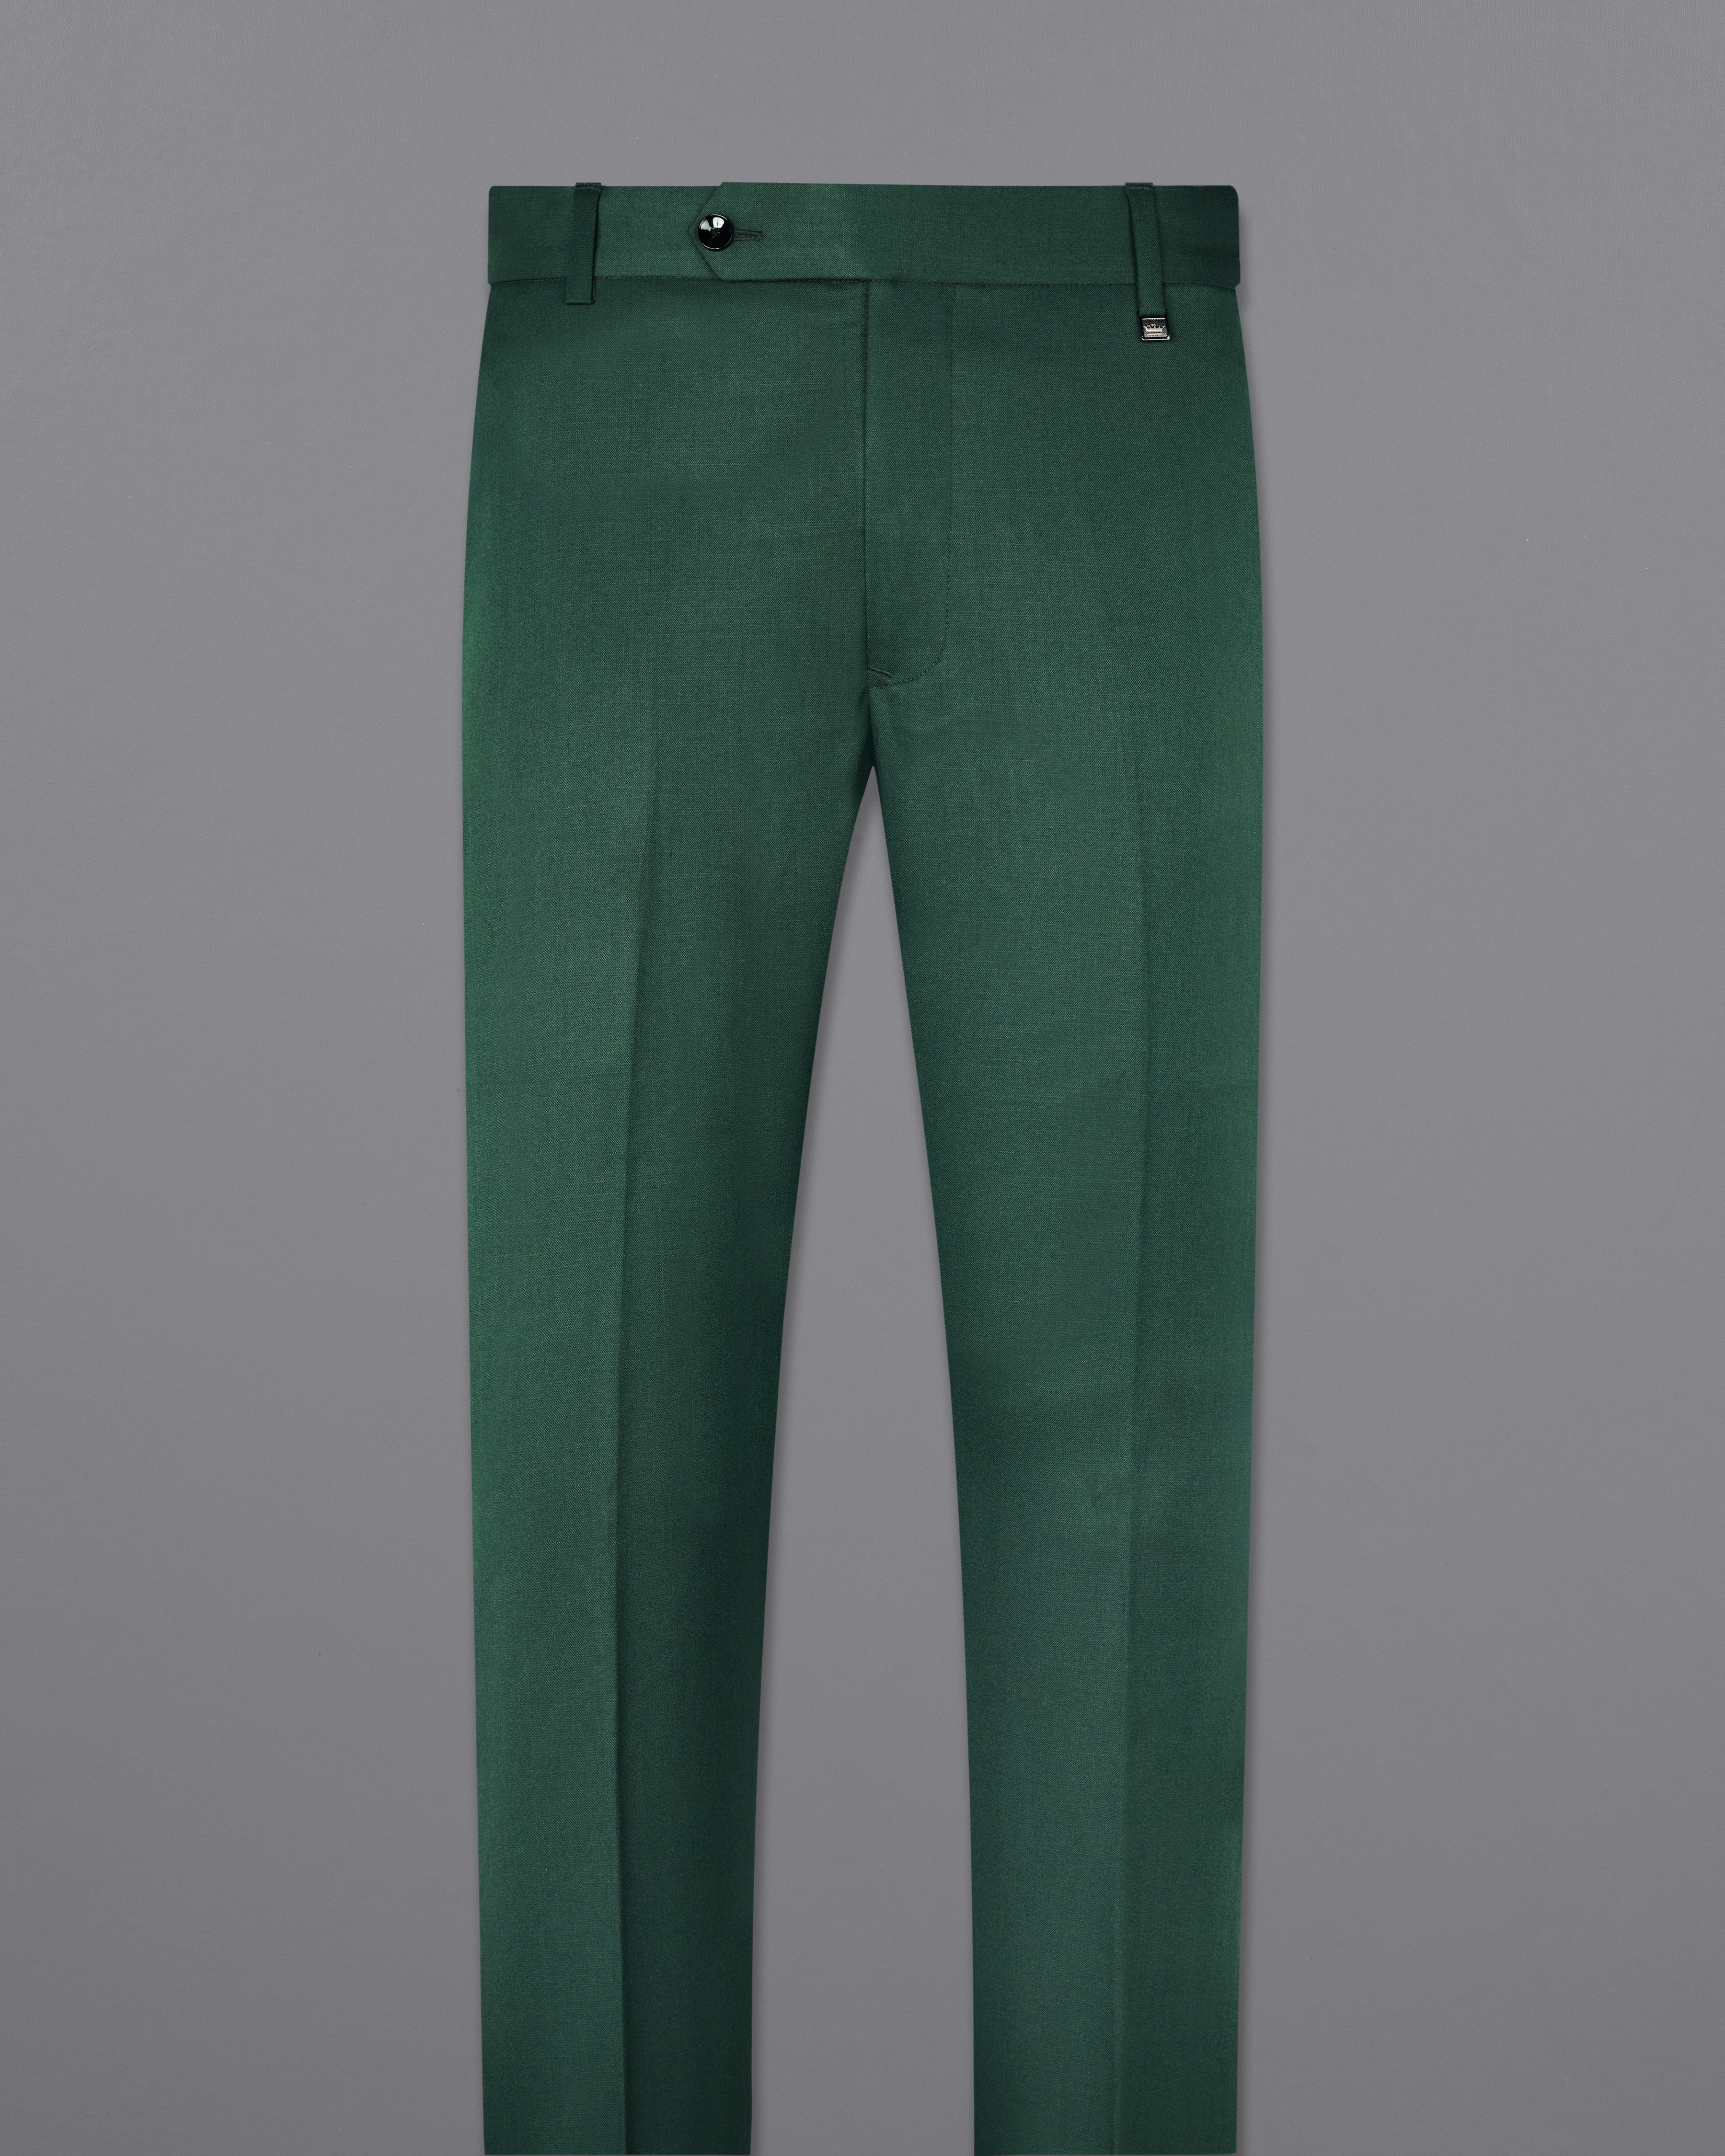 Green Pants Outfit to Look Stylish - FashionActivation | Green pants outfit,  Green pants, Outfits